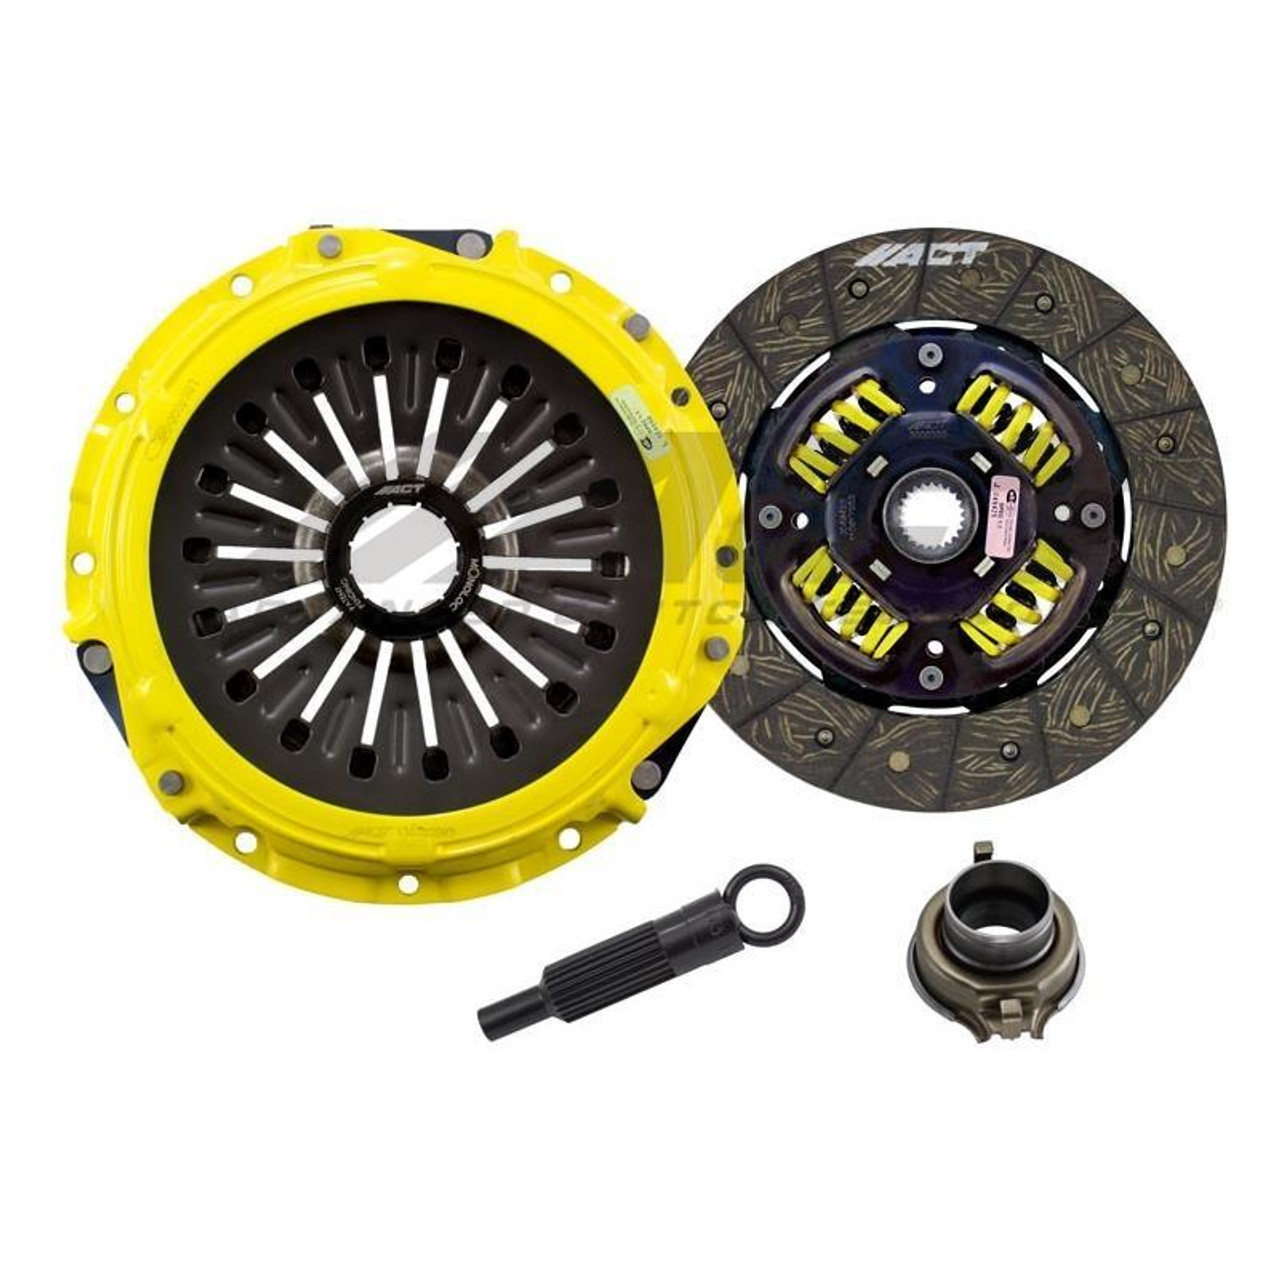 ACT ME2-HDSS Street Sprung Clutch Kit For Mitsubishi Evo 8/9